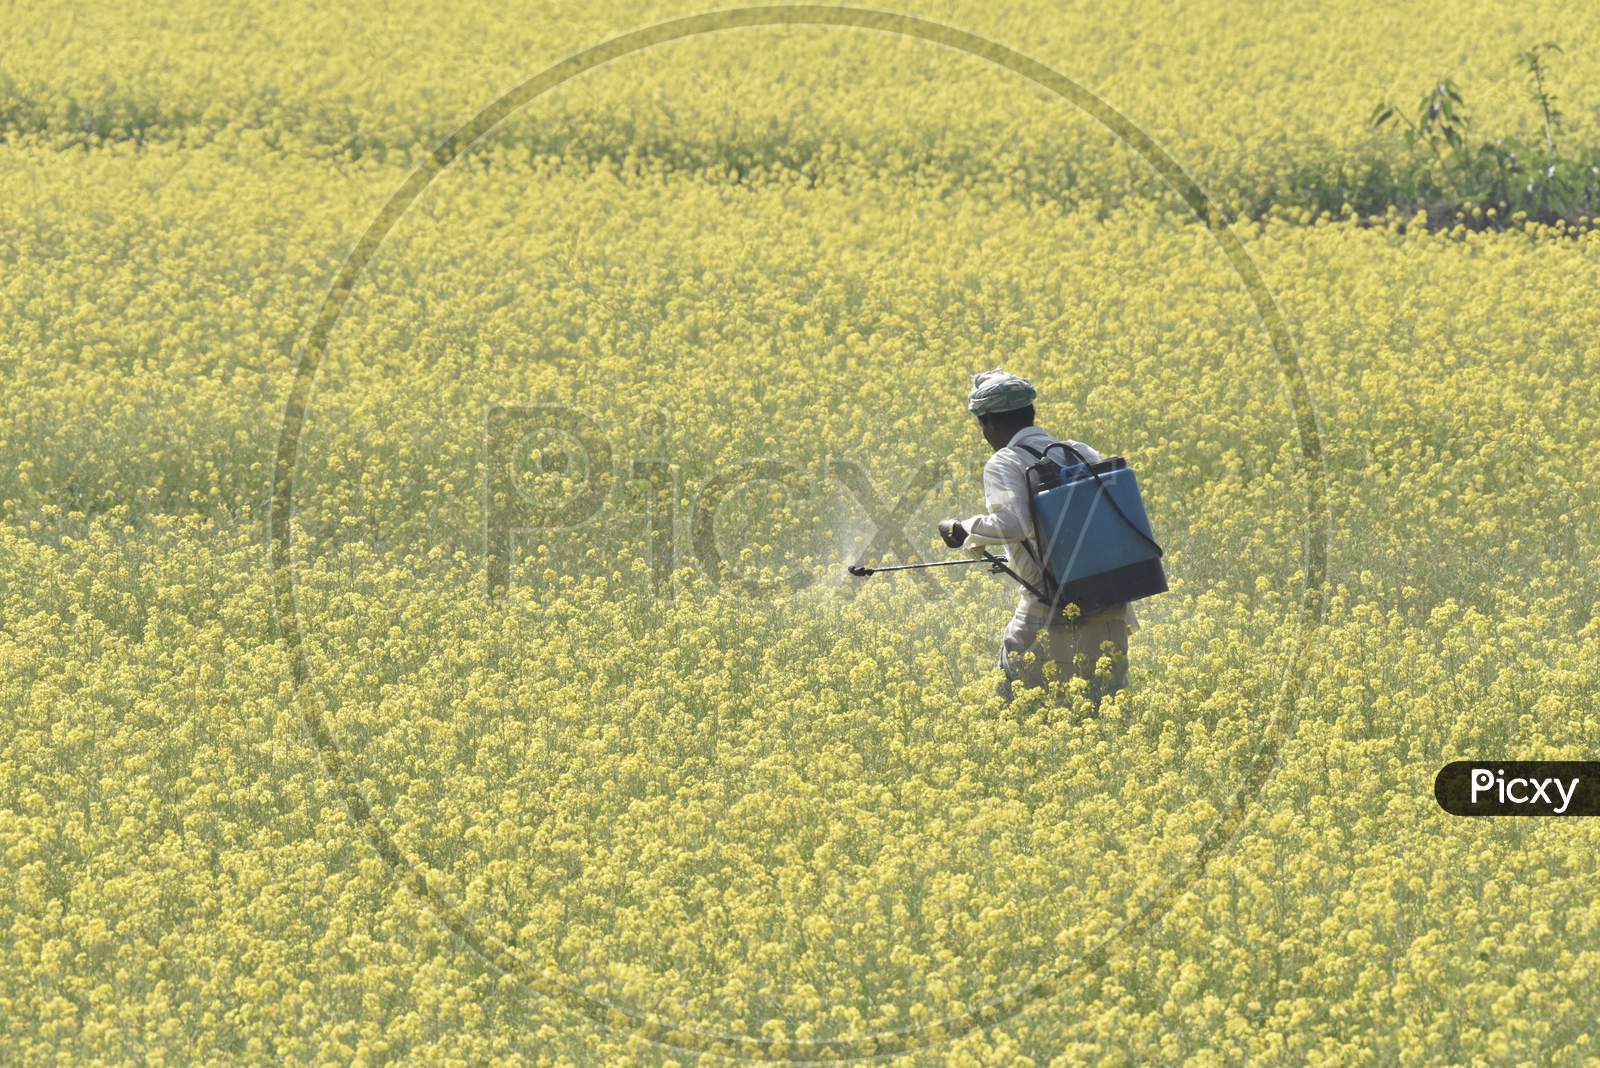 A Farmer Spraying Pesticides in an  Mustard Agricultural Fields in Morigaon, Assam